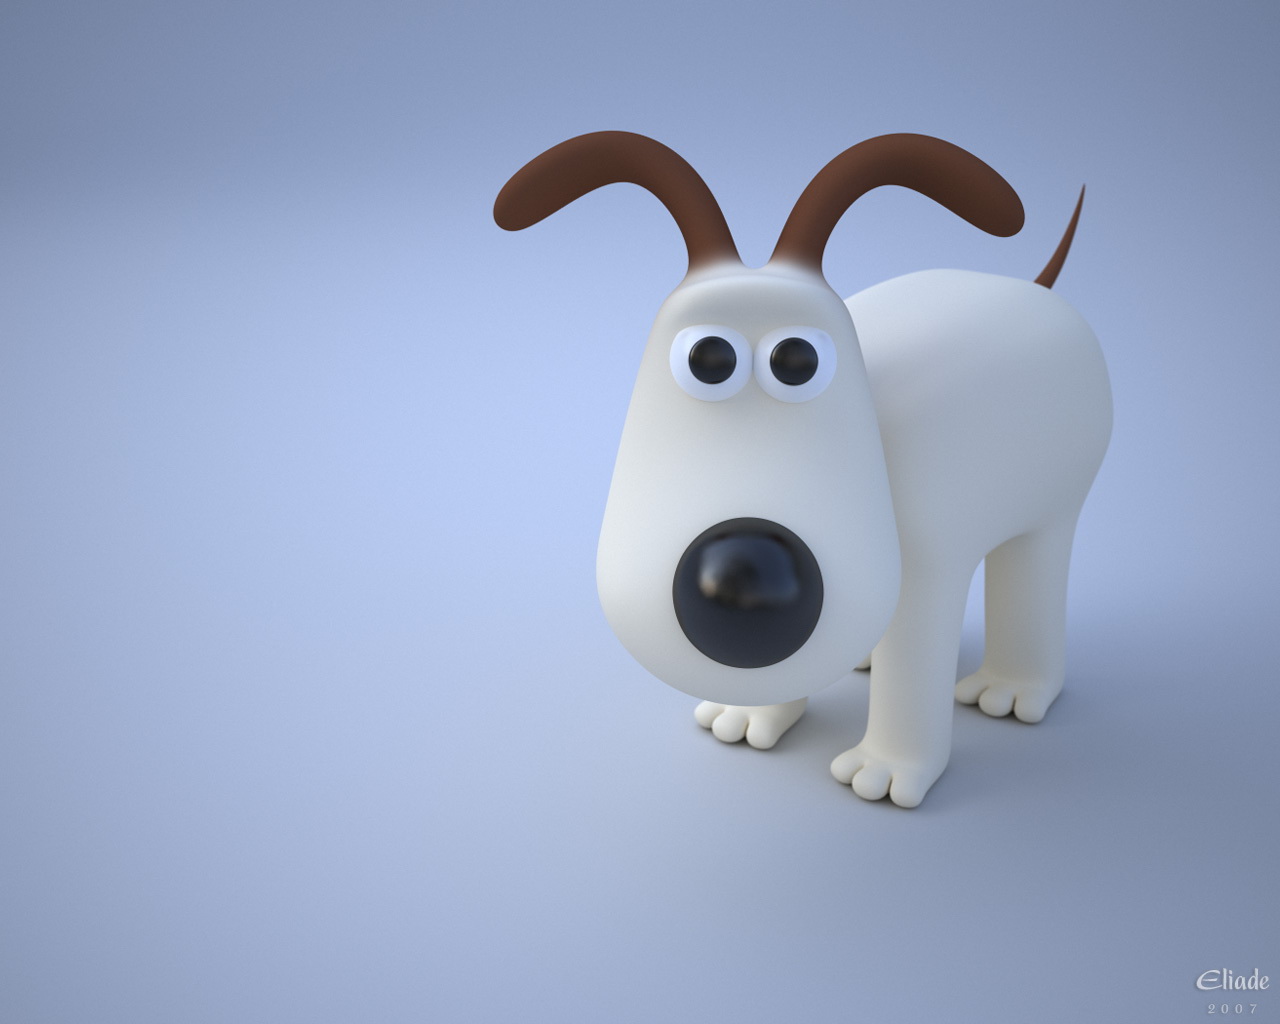 Cute 3D Dog Wallpapers - HD Wallpapers 292